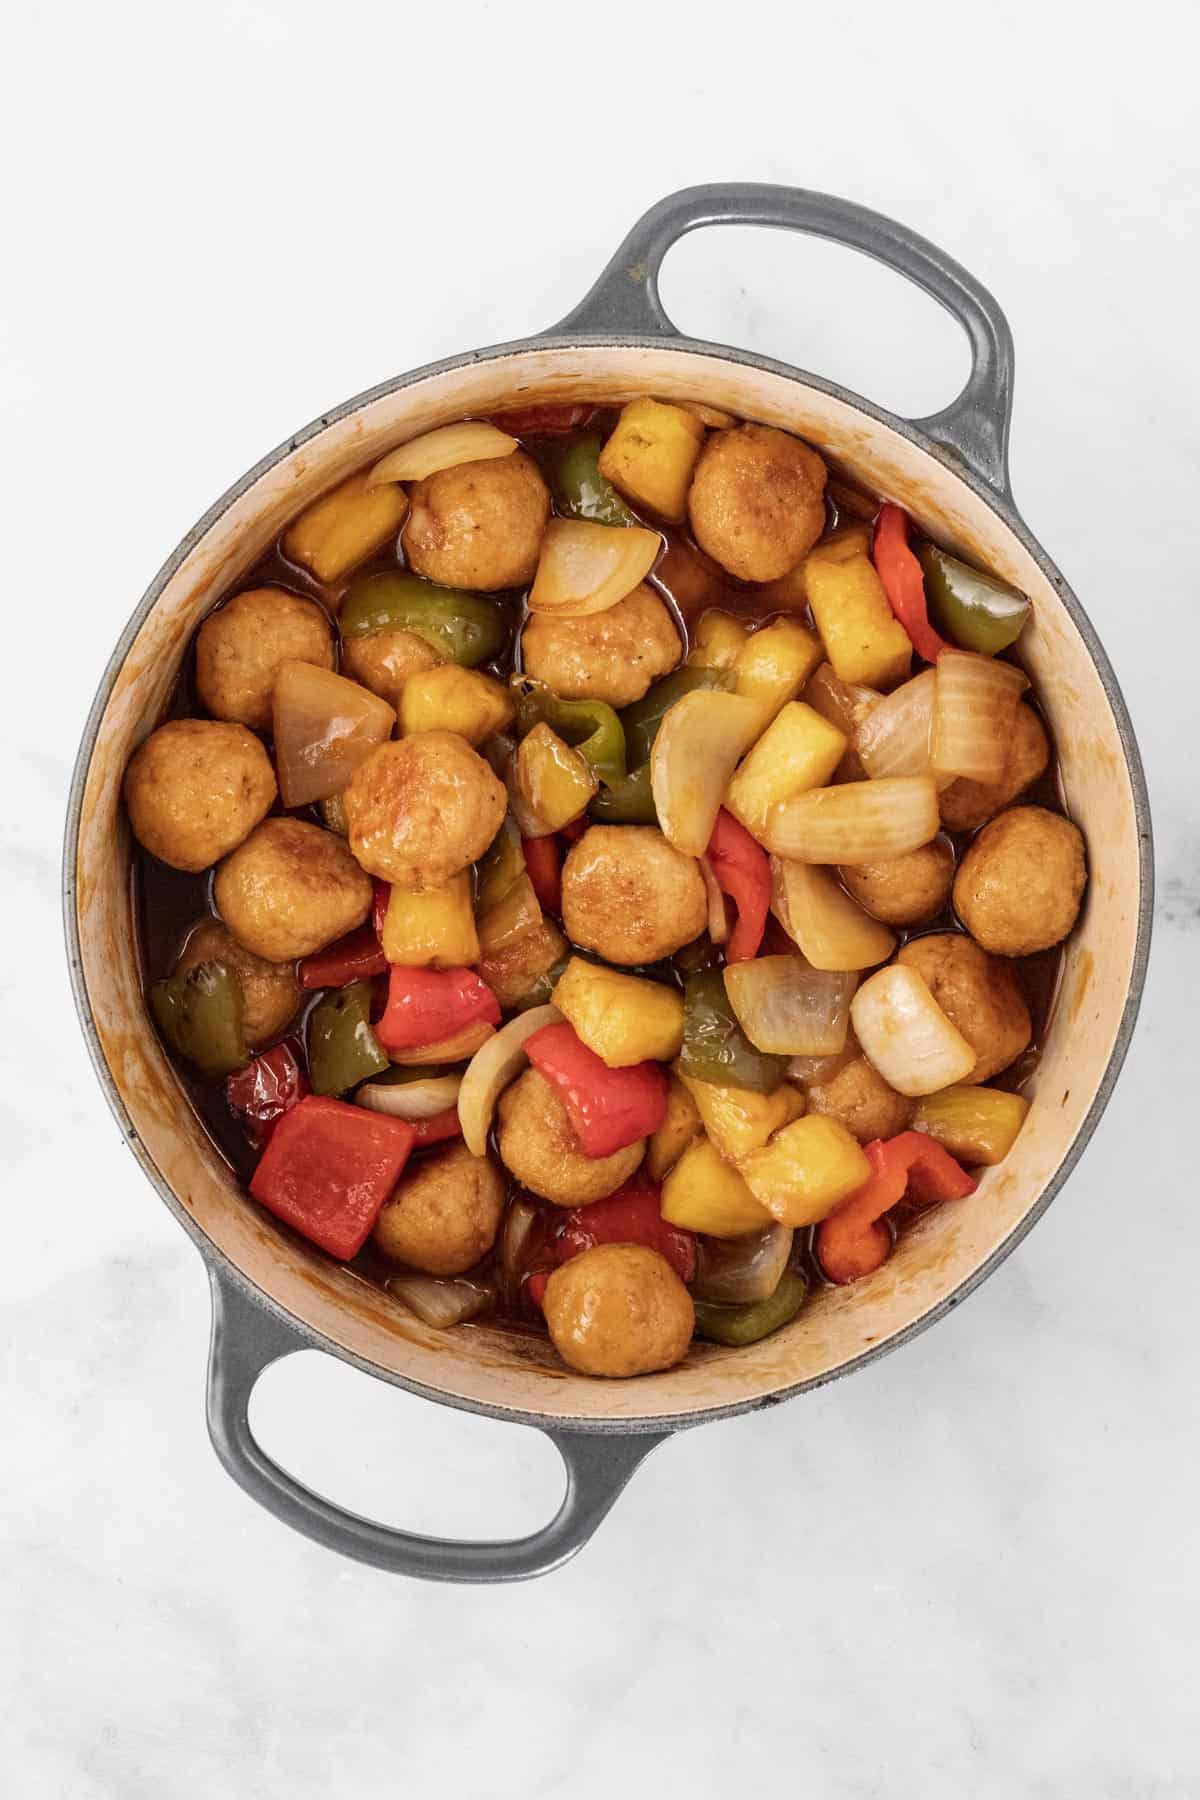 Baked meatballs, stir fried vegetables, pineapple, and sweet and sour sauce mixed together in a dutch oven.